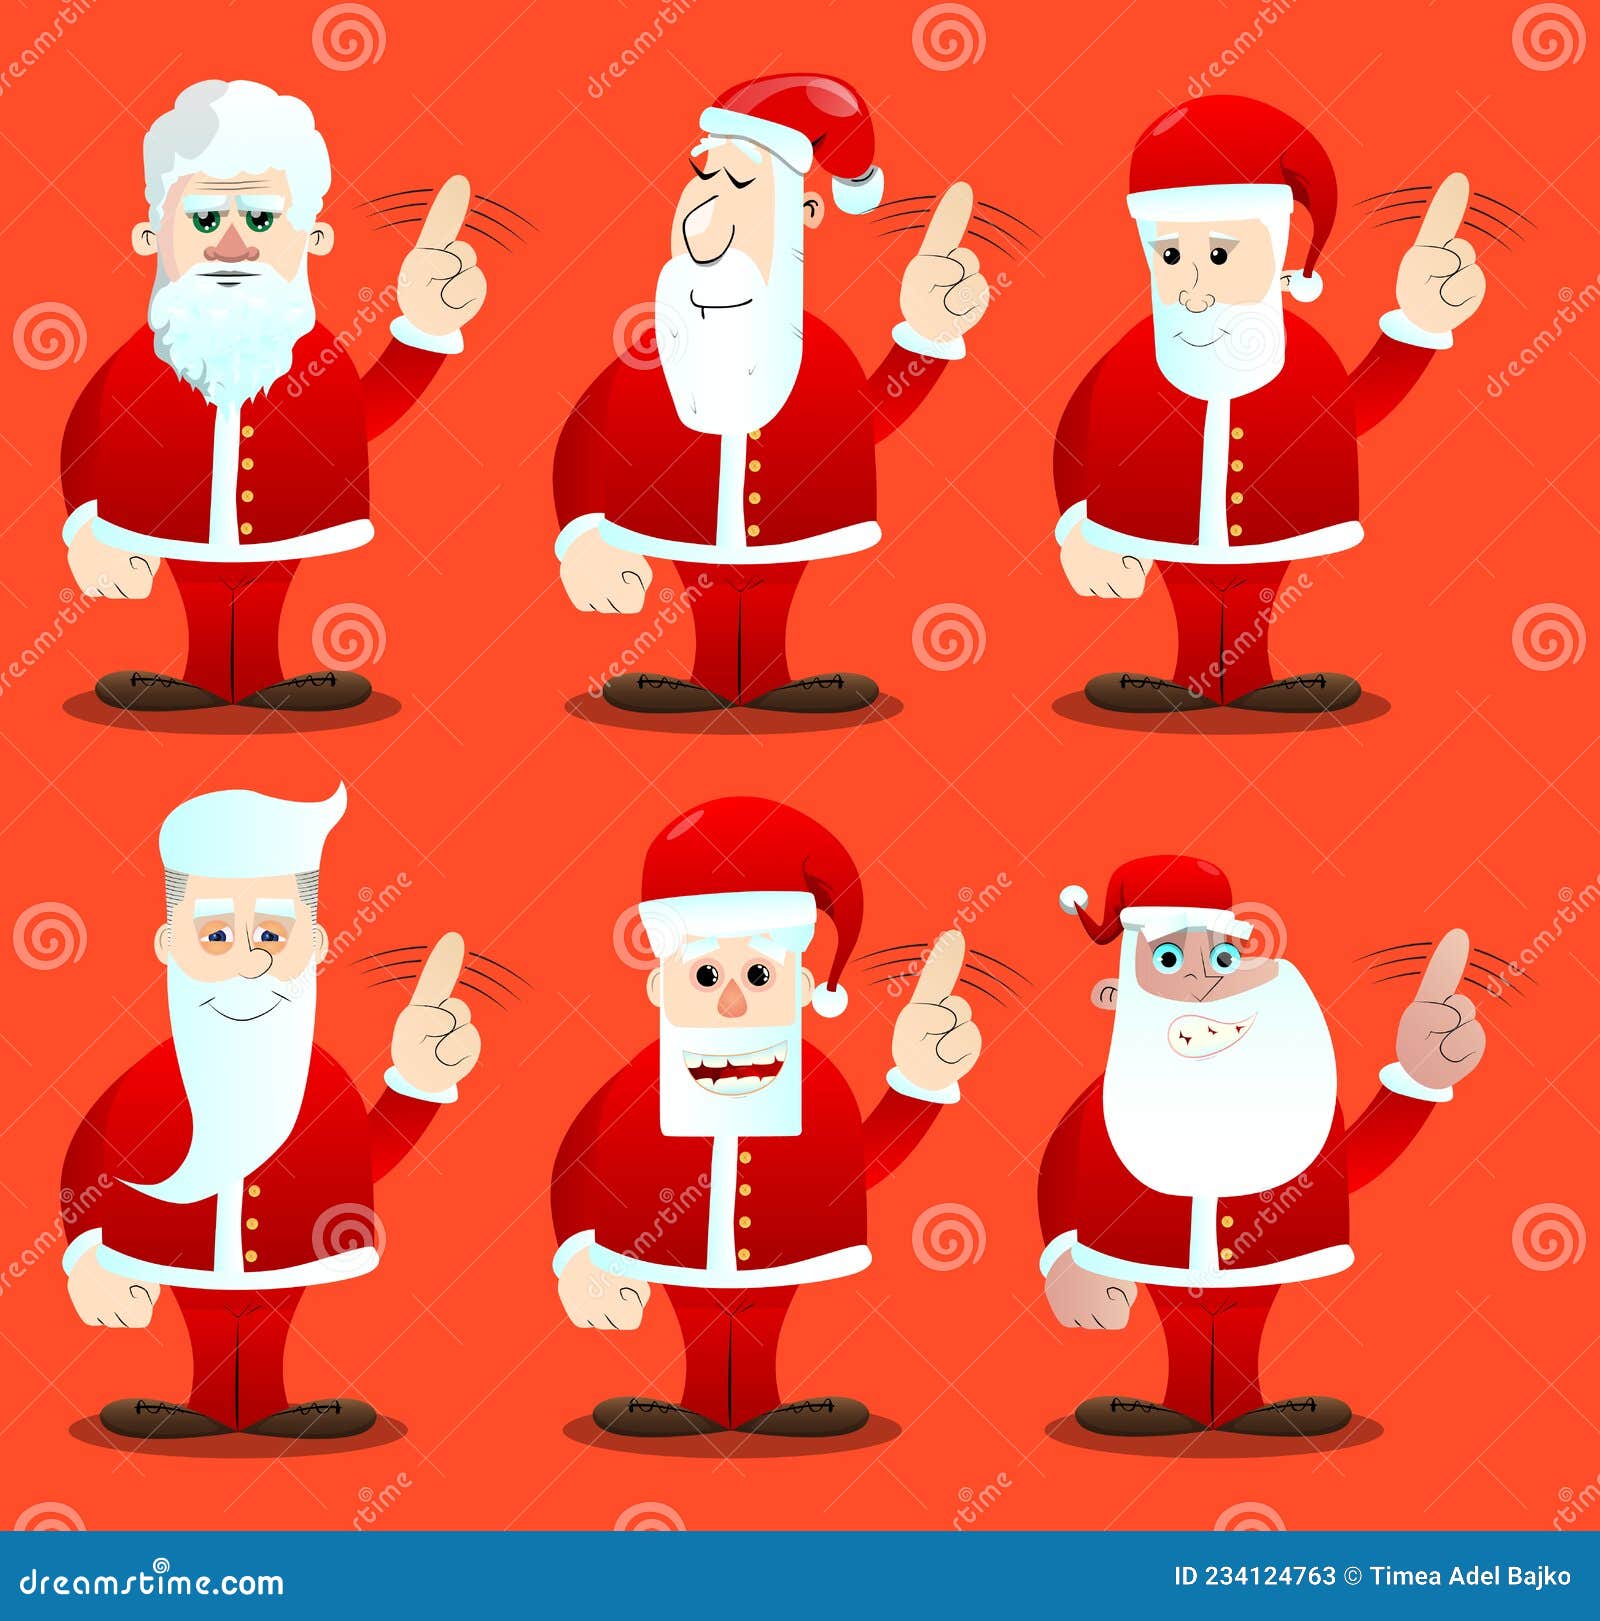 Santa Claus in His Red Clothes Saying No with His Finger. Stock Vector ...